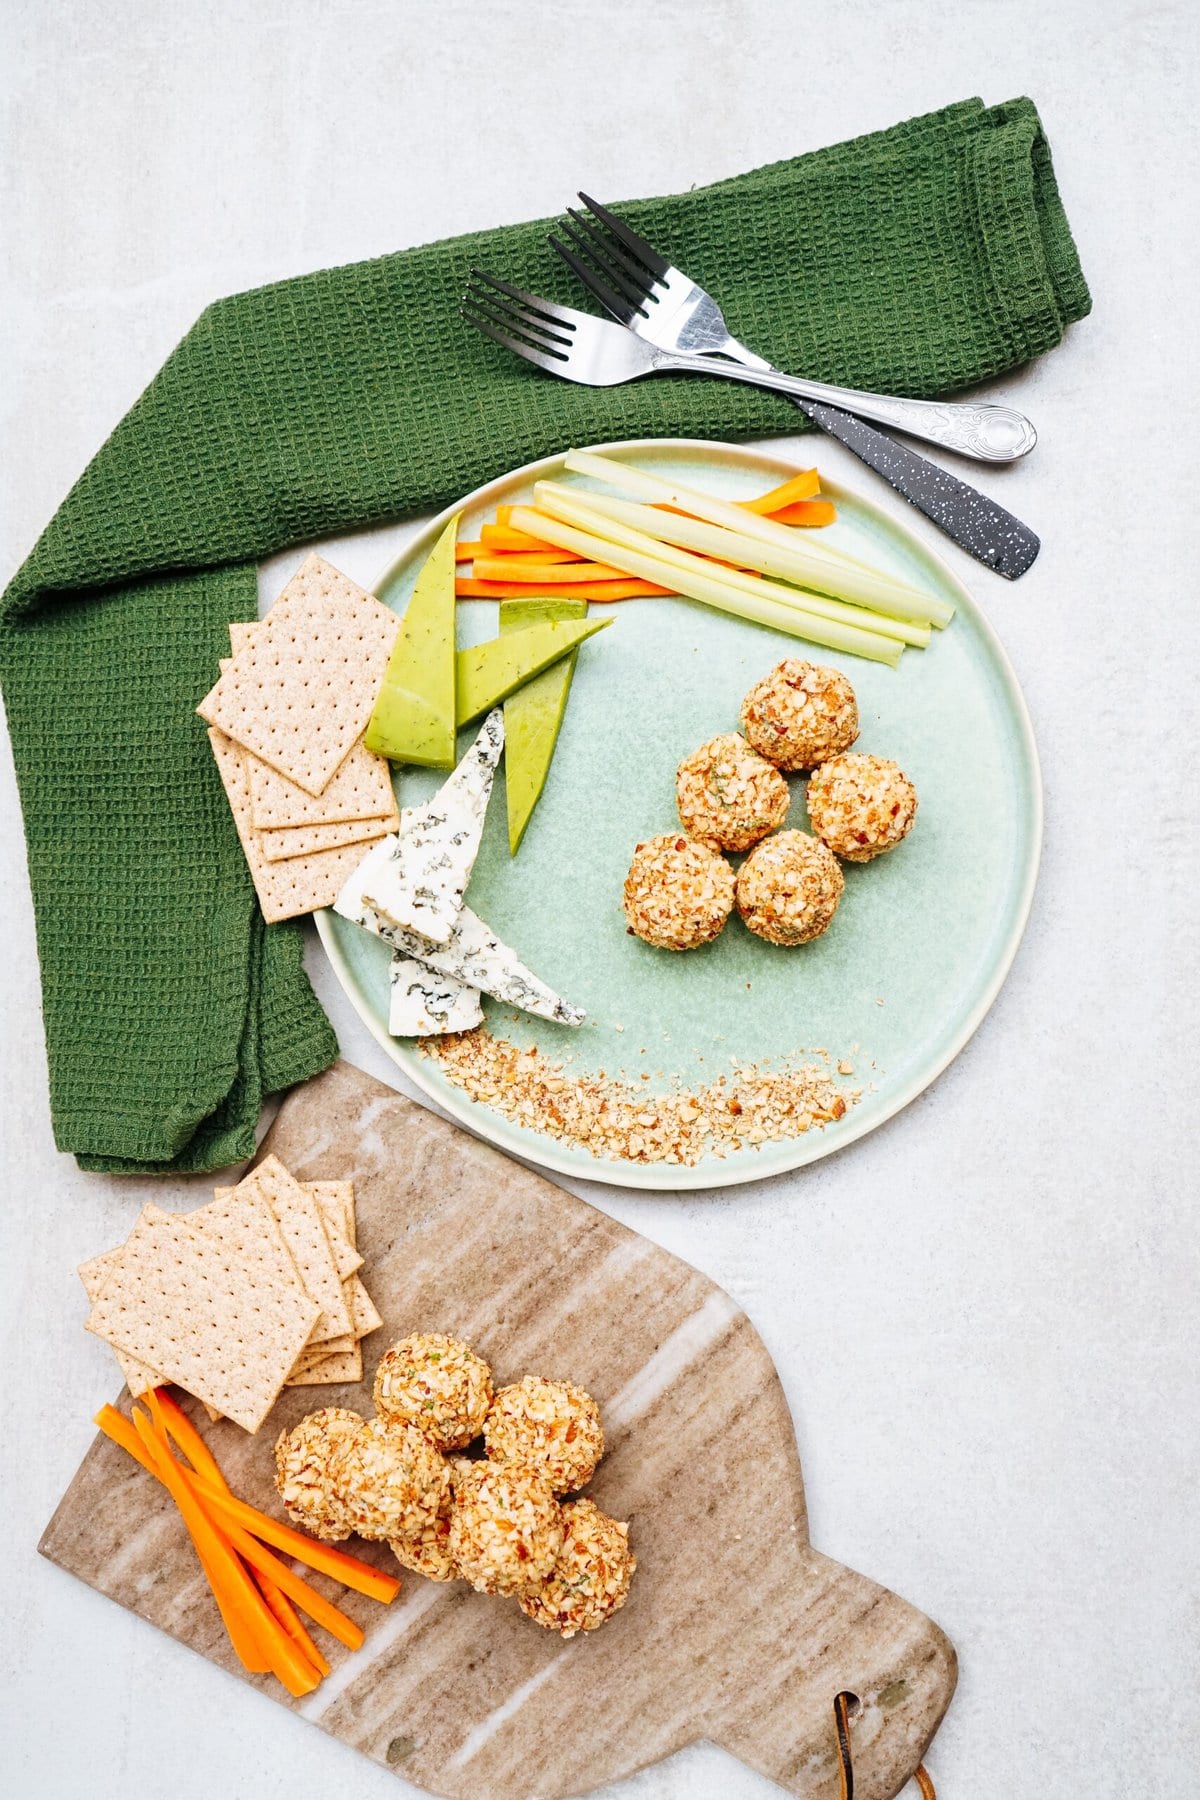 A plate of goat cheese truffles with herbs, slices of bread, celery, and carrot sticks next to a green cloth and utensils. Additional cheese balls and crackers are on a wooden board.